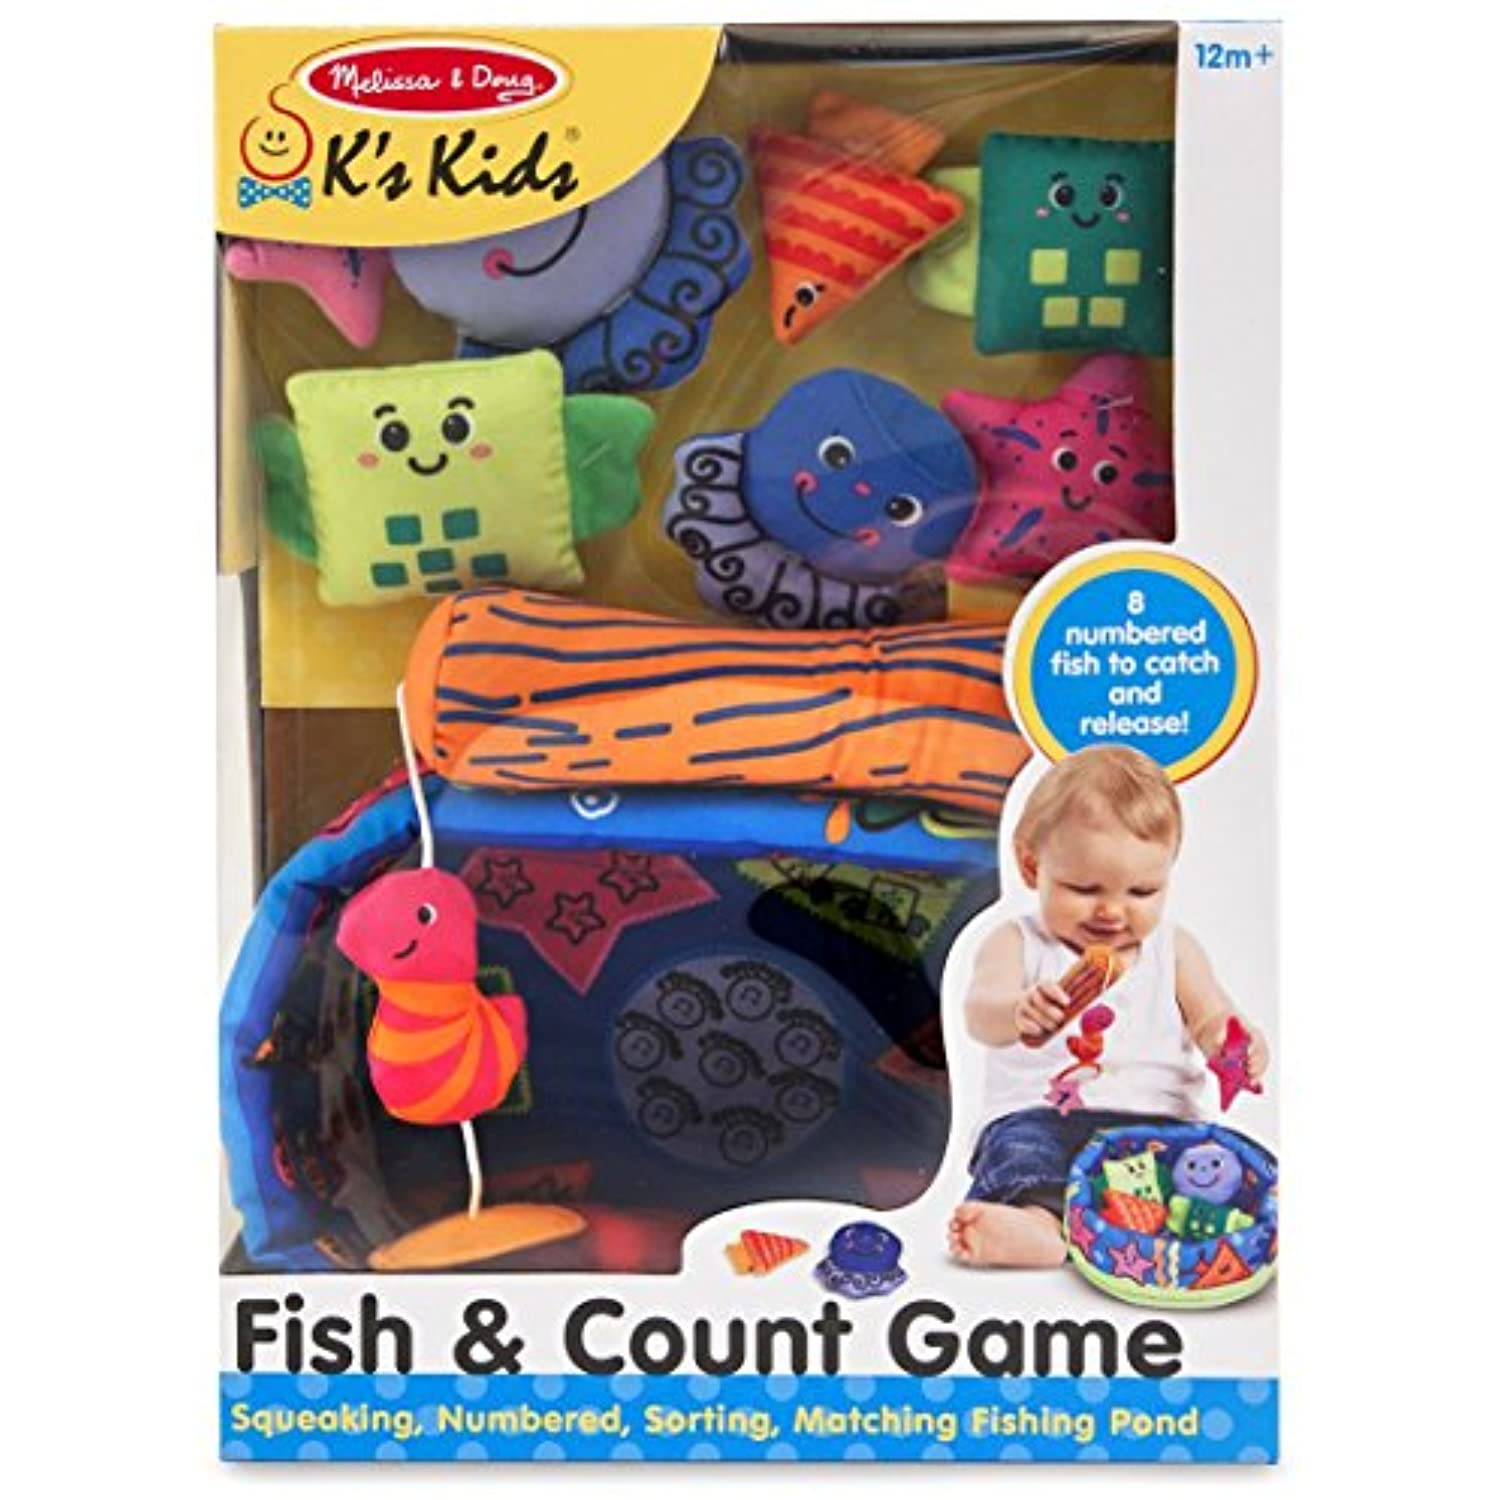 K's Kids Fish and Count Learning Game + FREE Melissa & Doug Scratch Art Mini-Pad Bundle